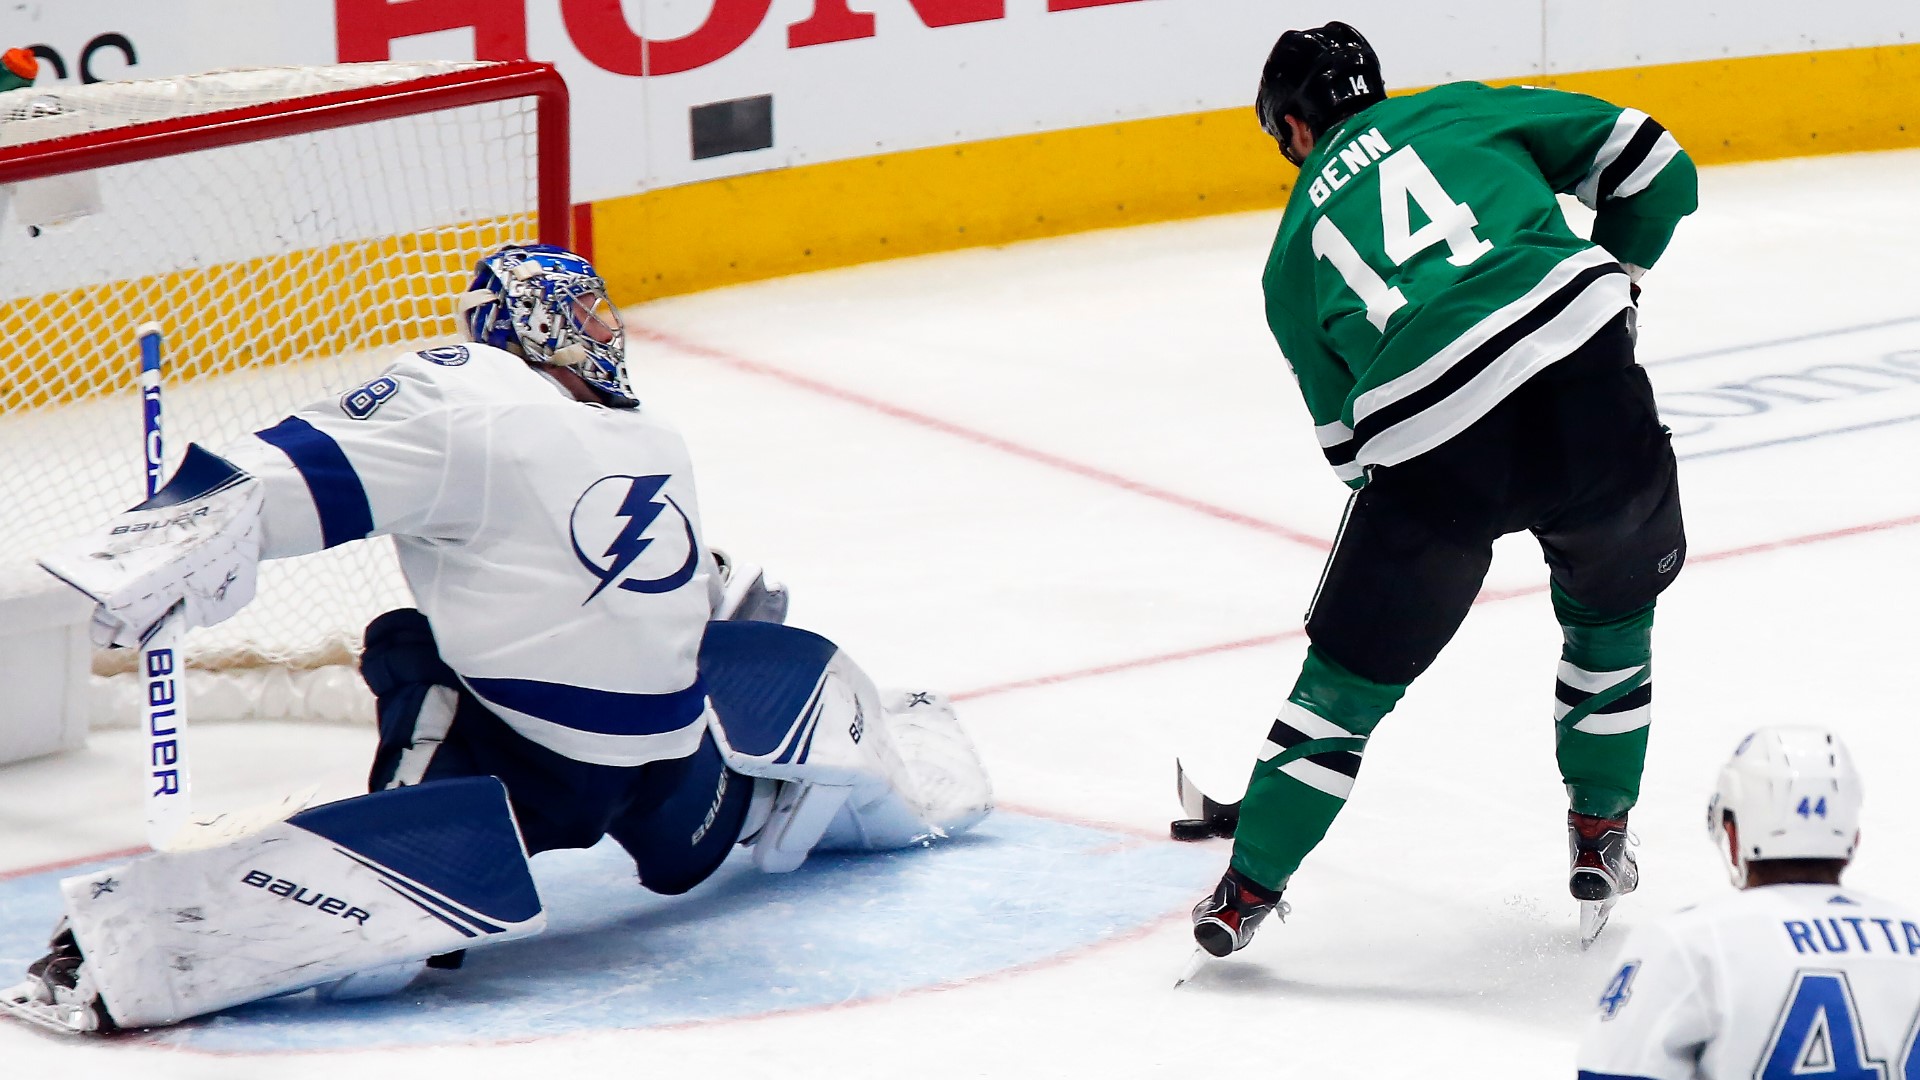 The Dallas Stars are about to play in their first Stanley Cup Final appearance in 20 years. Here's a breakdown of how hockey works to get you ready for the games.